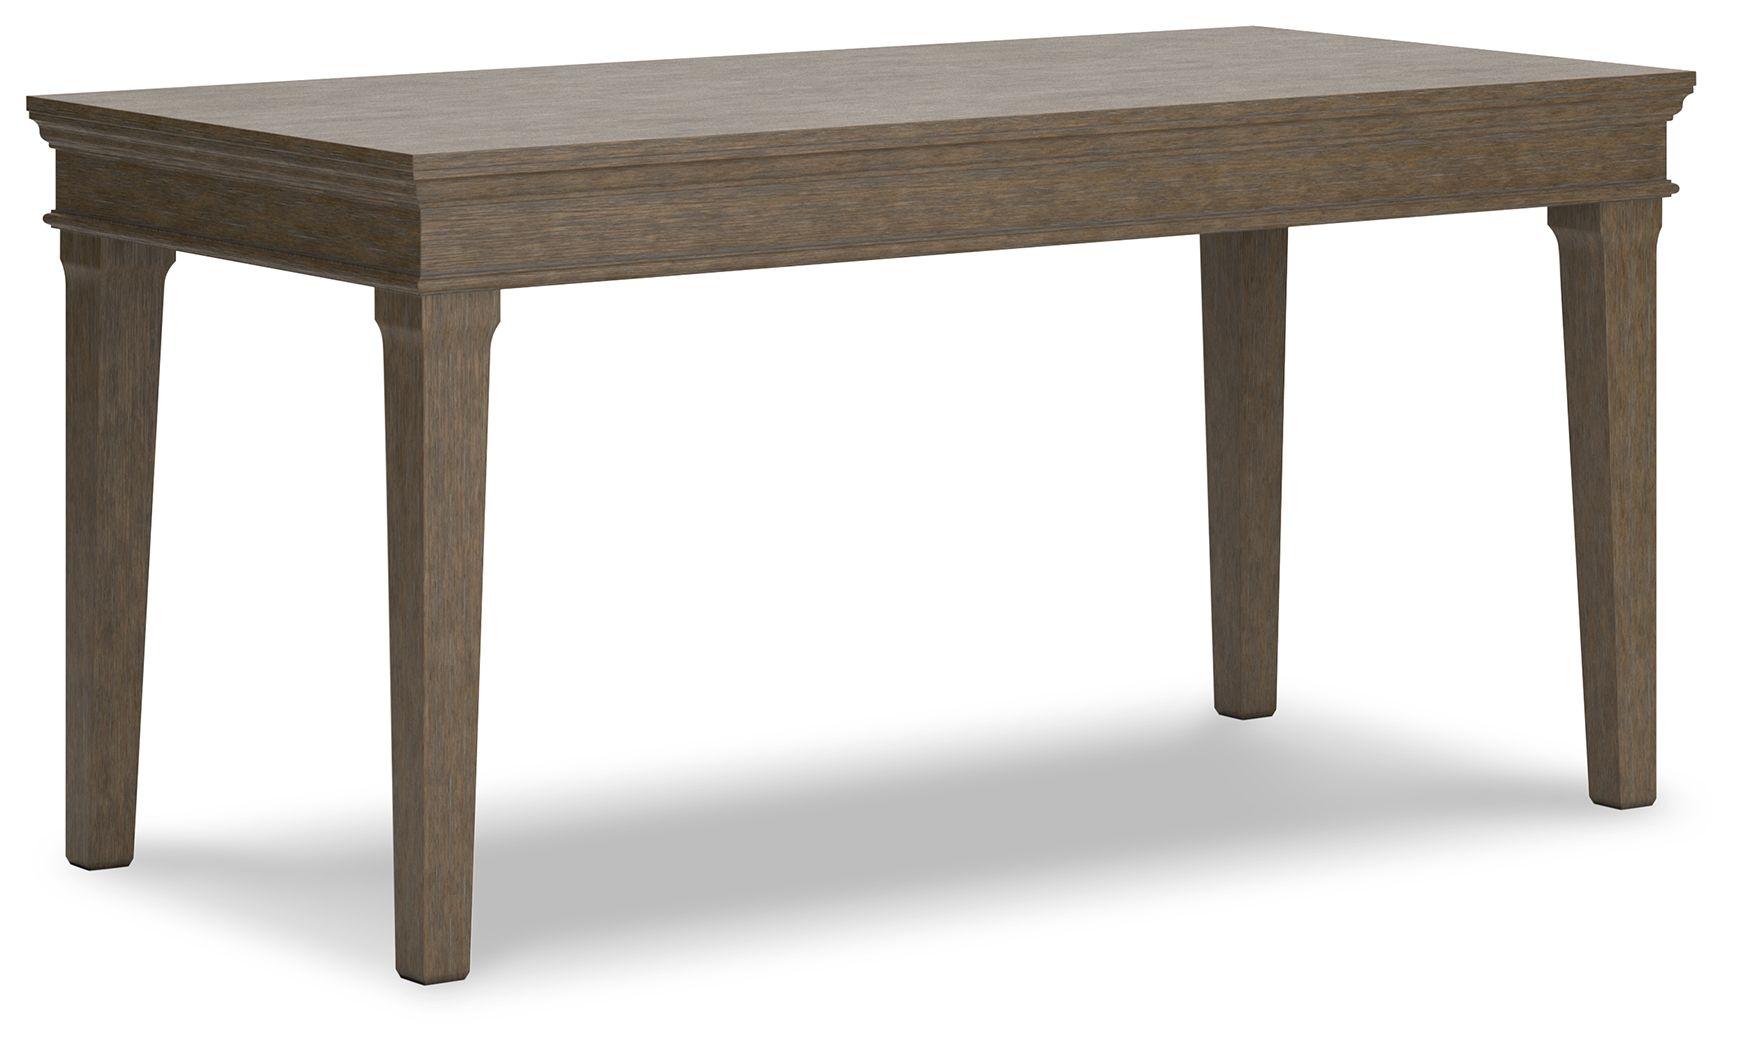 Signature Design by Ashley® - Janismore - Weathered Gray - Home Office Desk - 5th Avenue Furniture